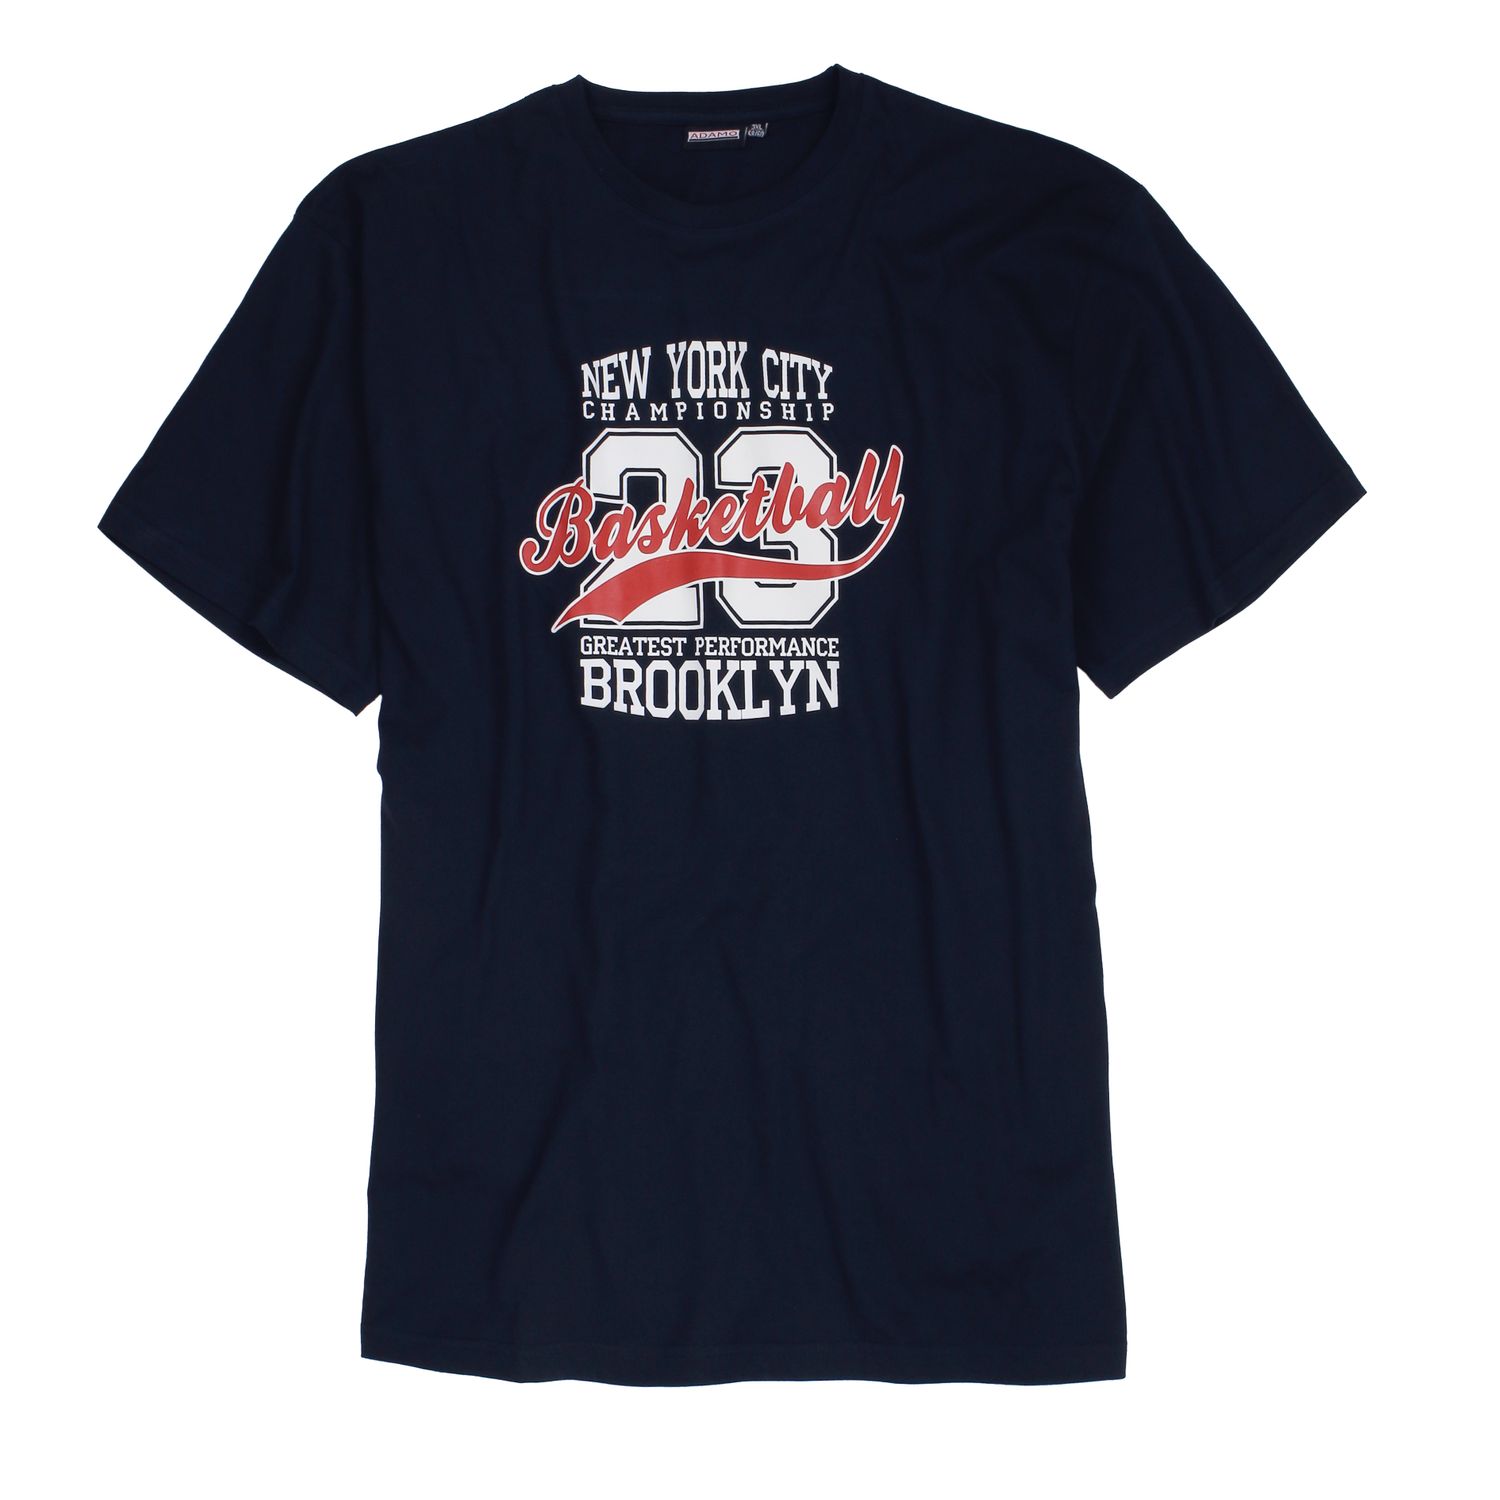 T-shirt series BRKLN BASKETBALL by Adamo in navy with imprint up to oversize 12XL